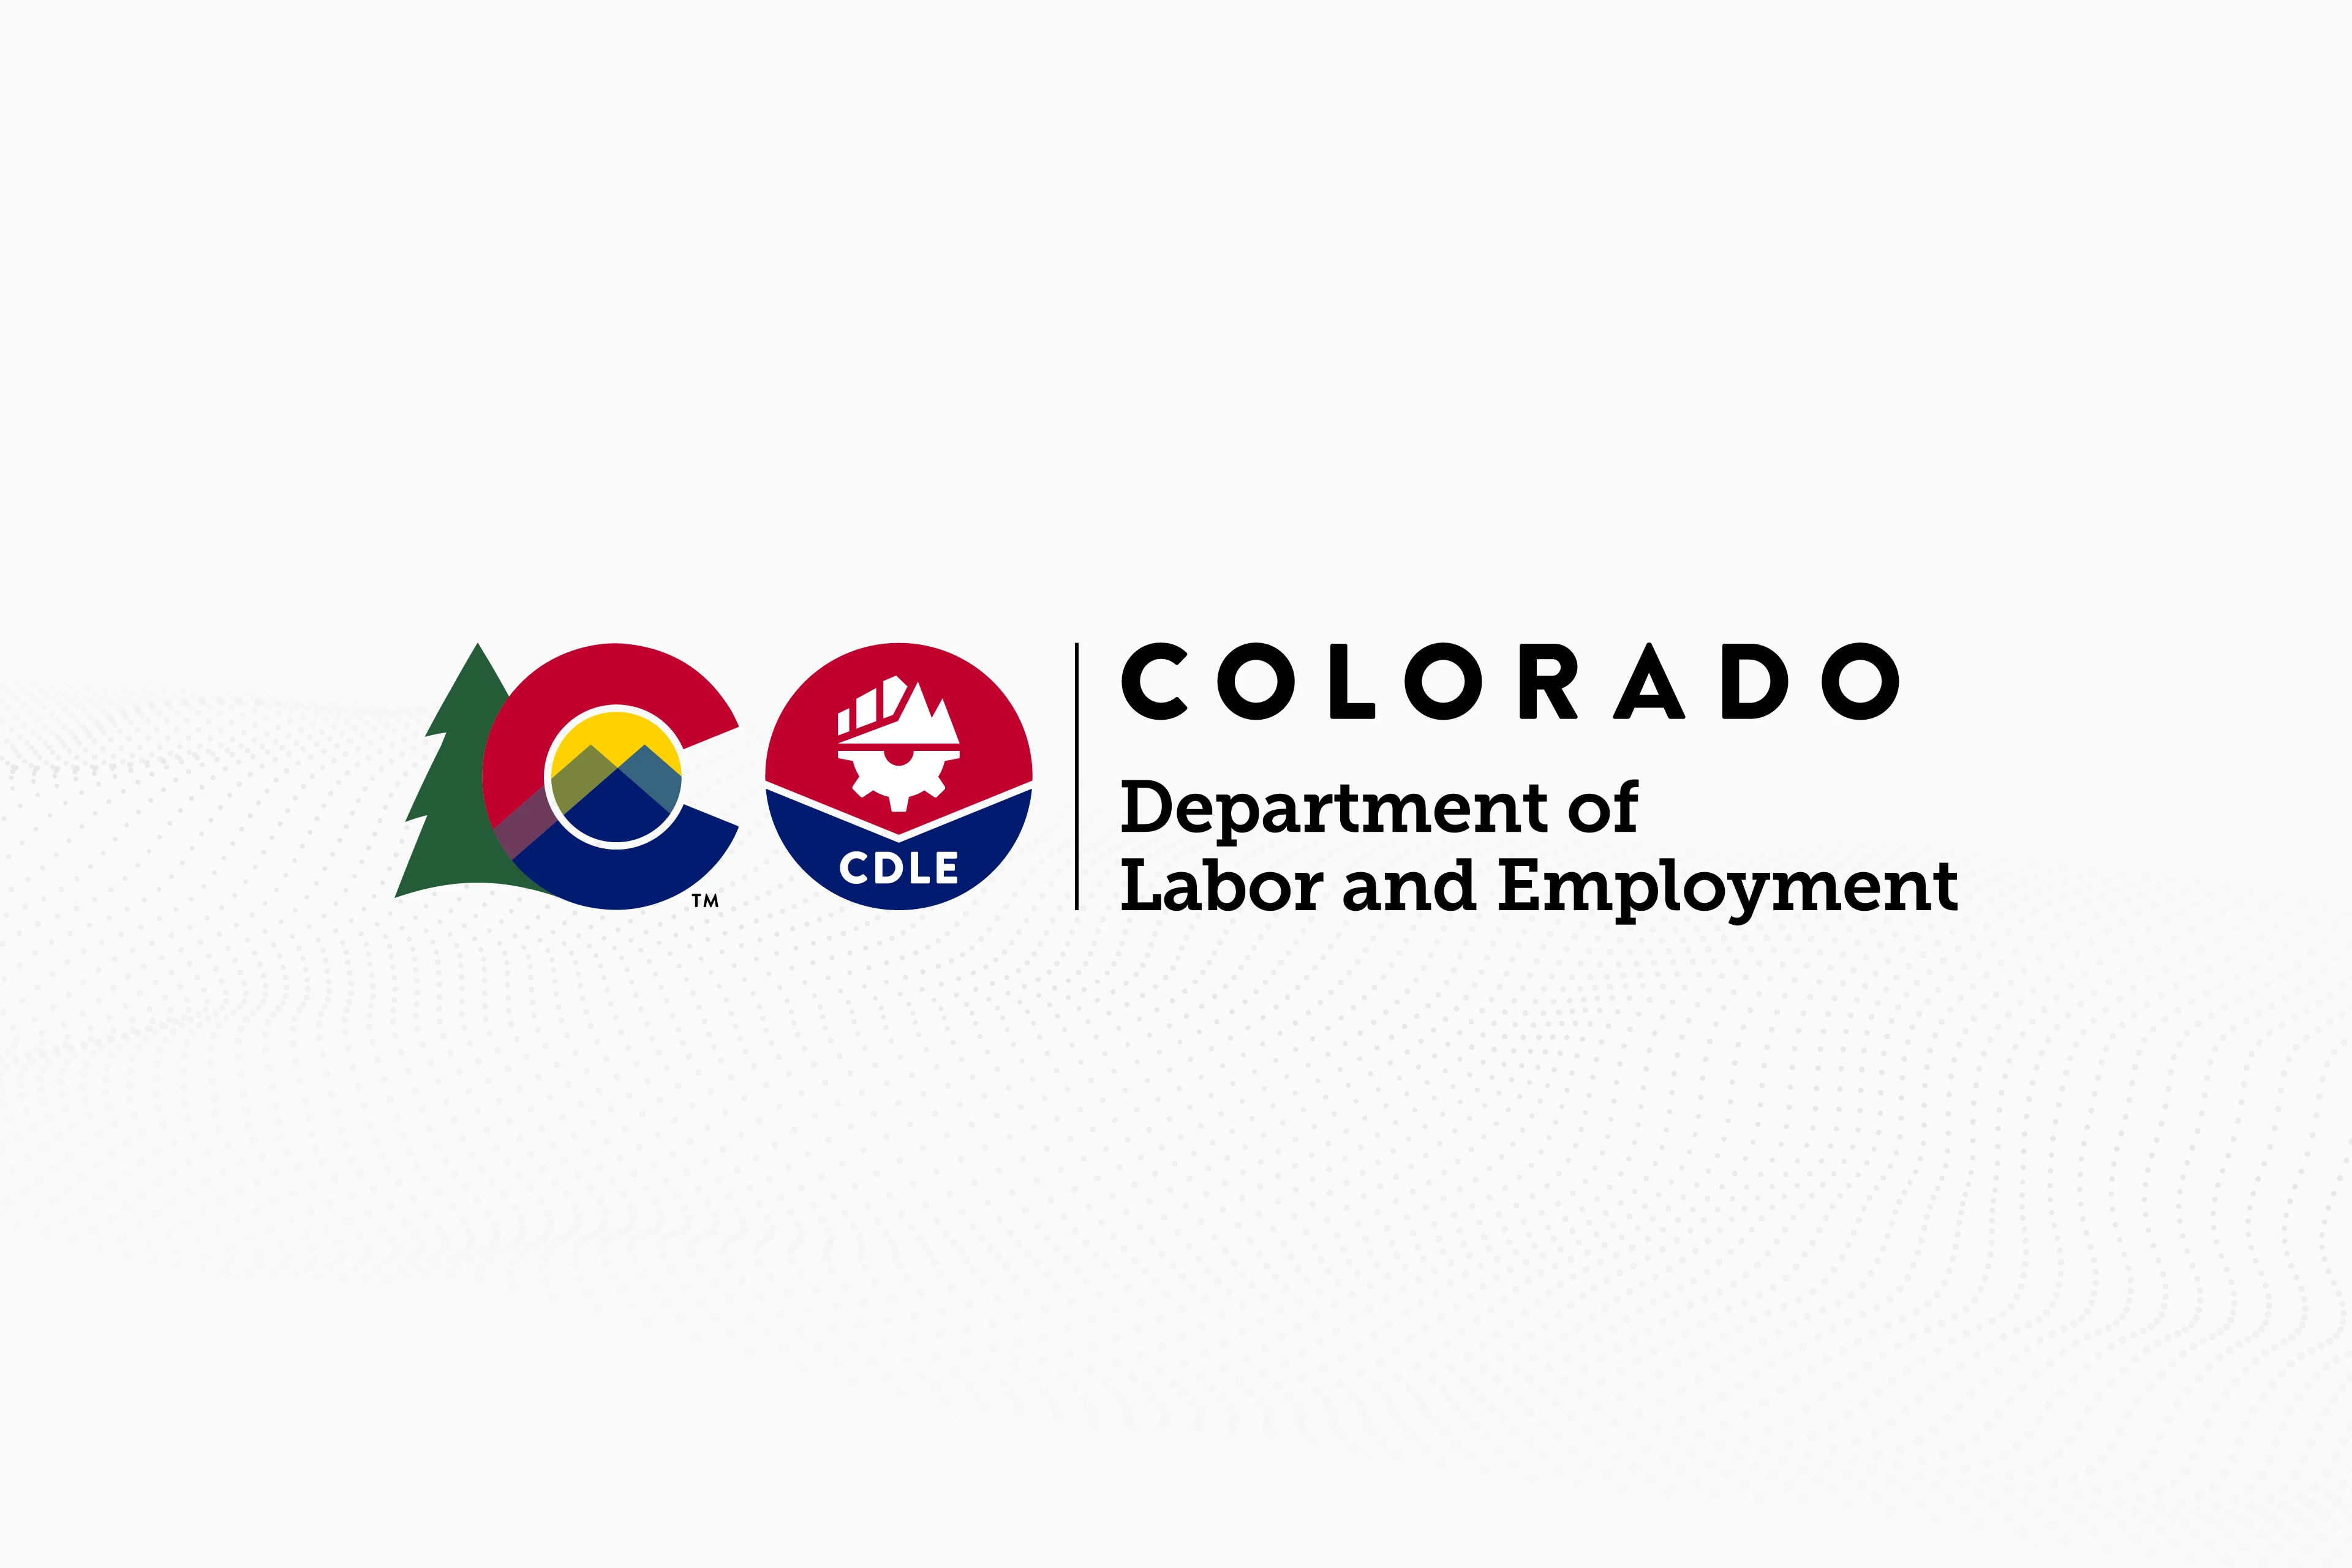 Colorado Department of Labor and Employment projects